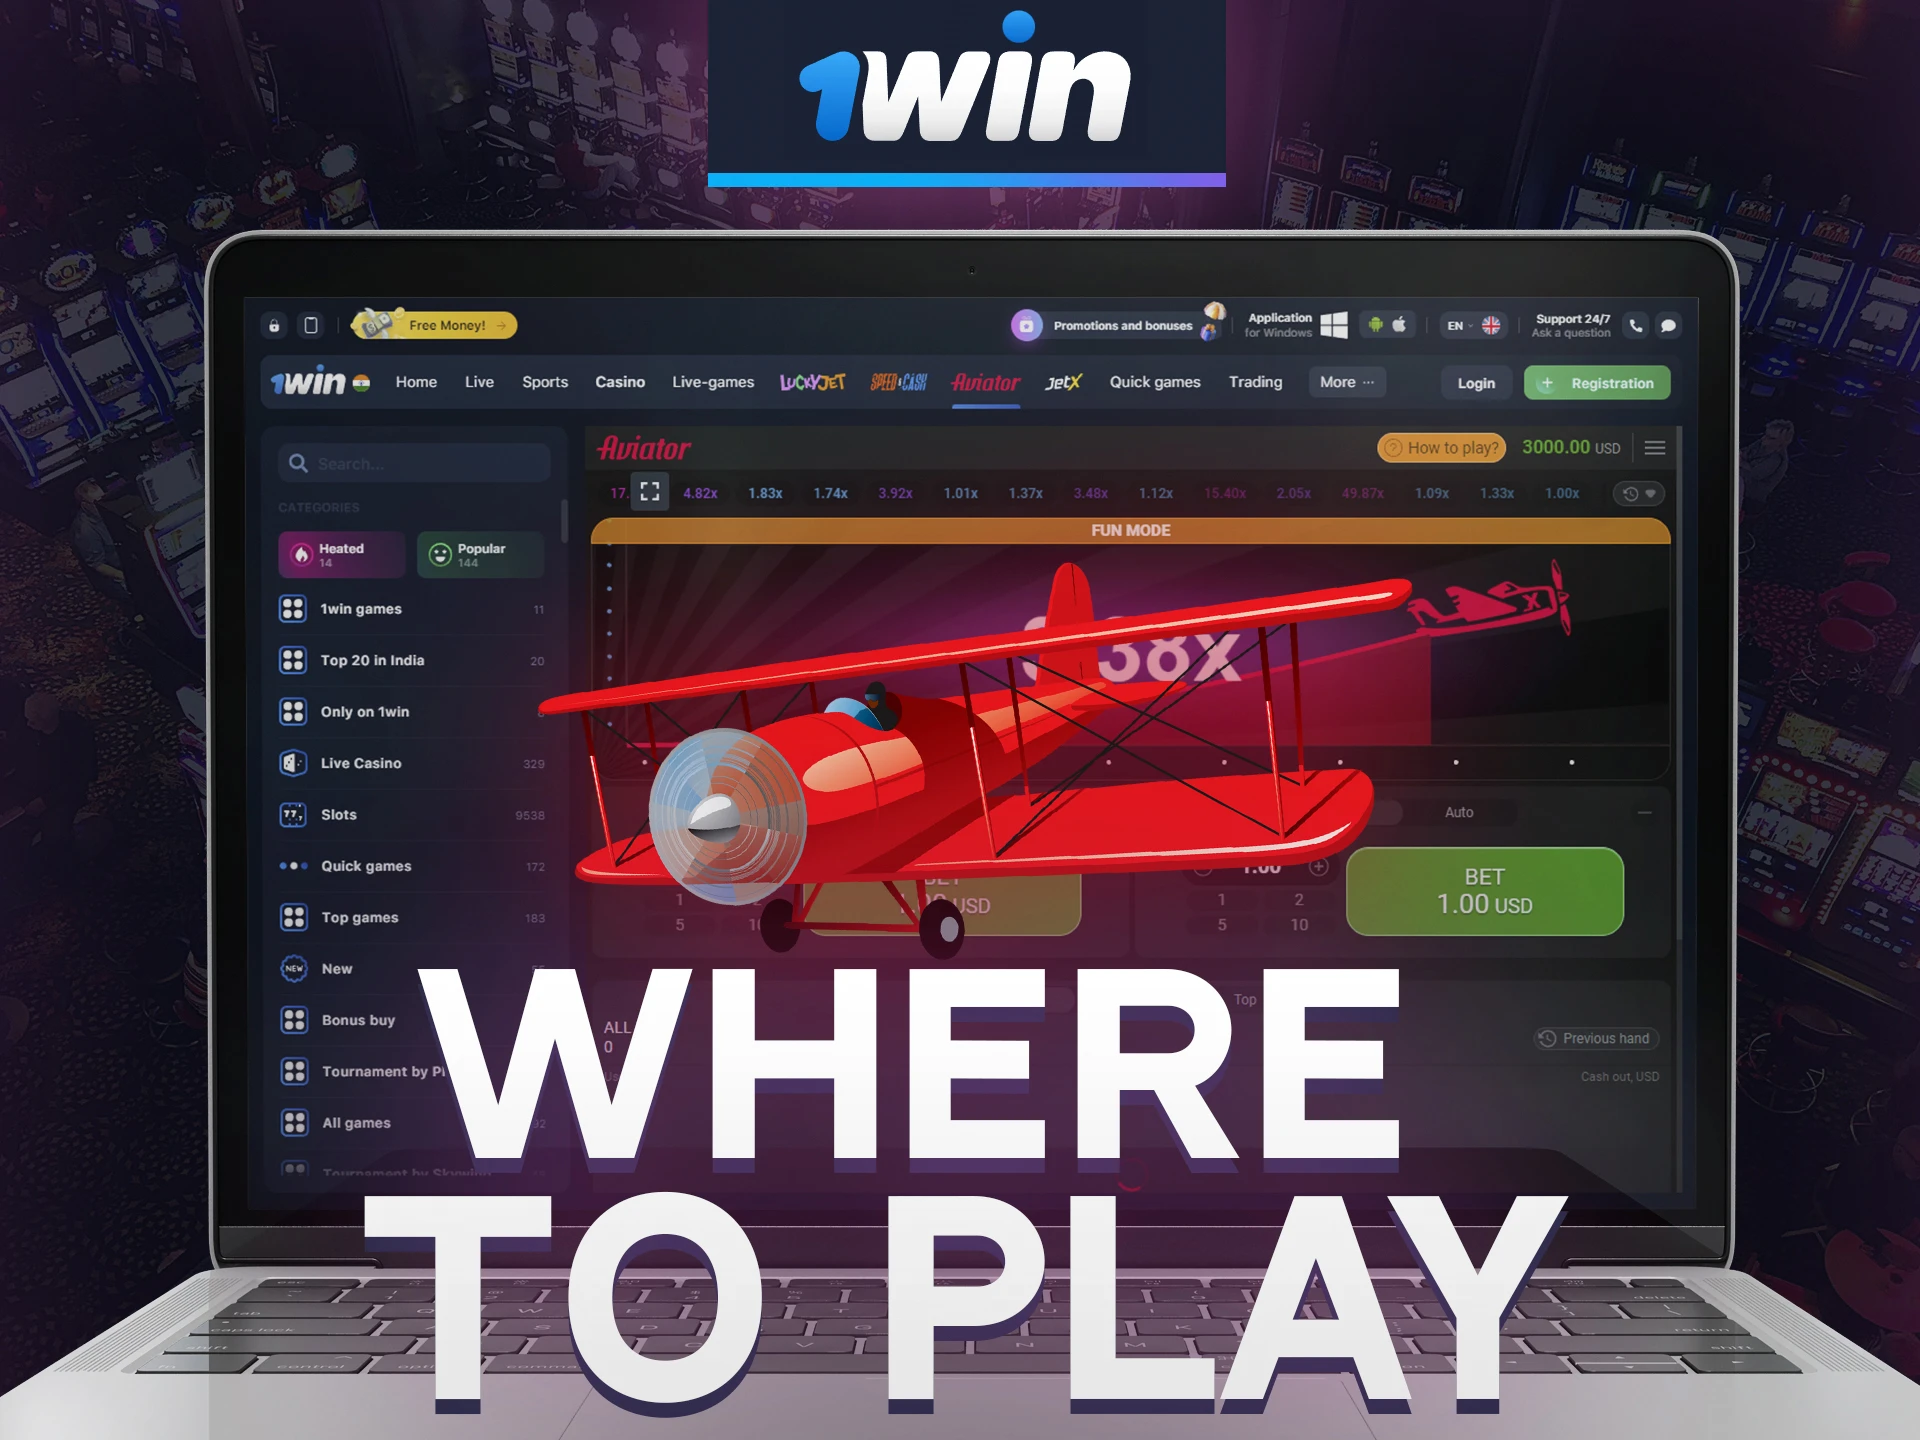 Aviator game is one of the most popular casino games on 1win.